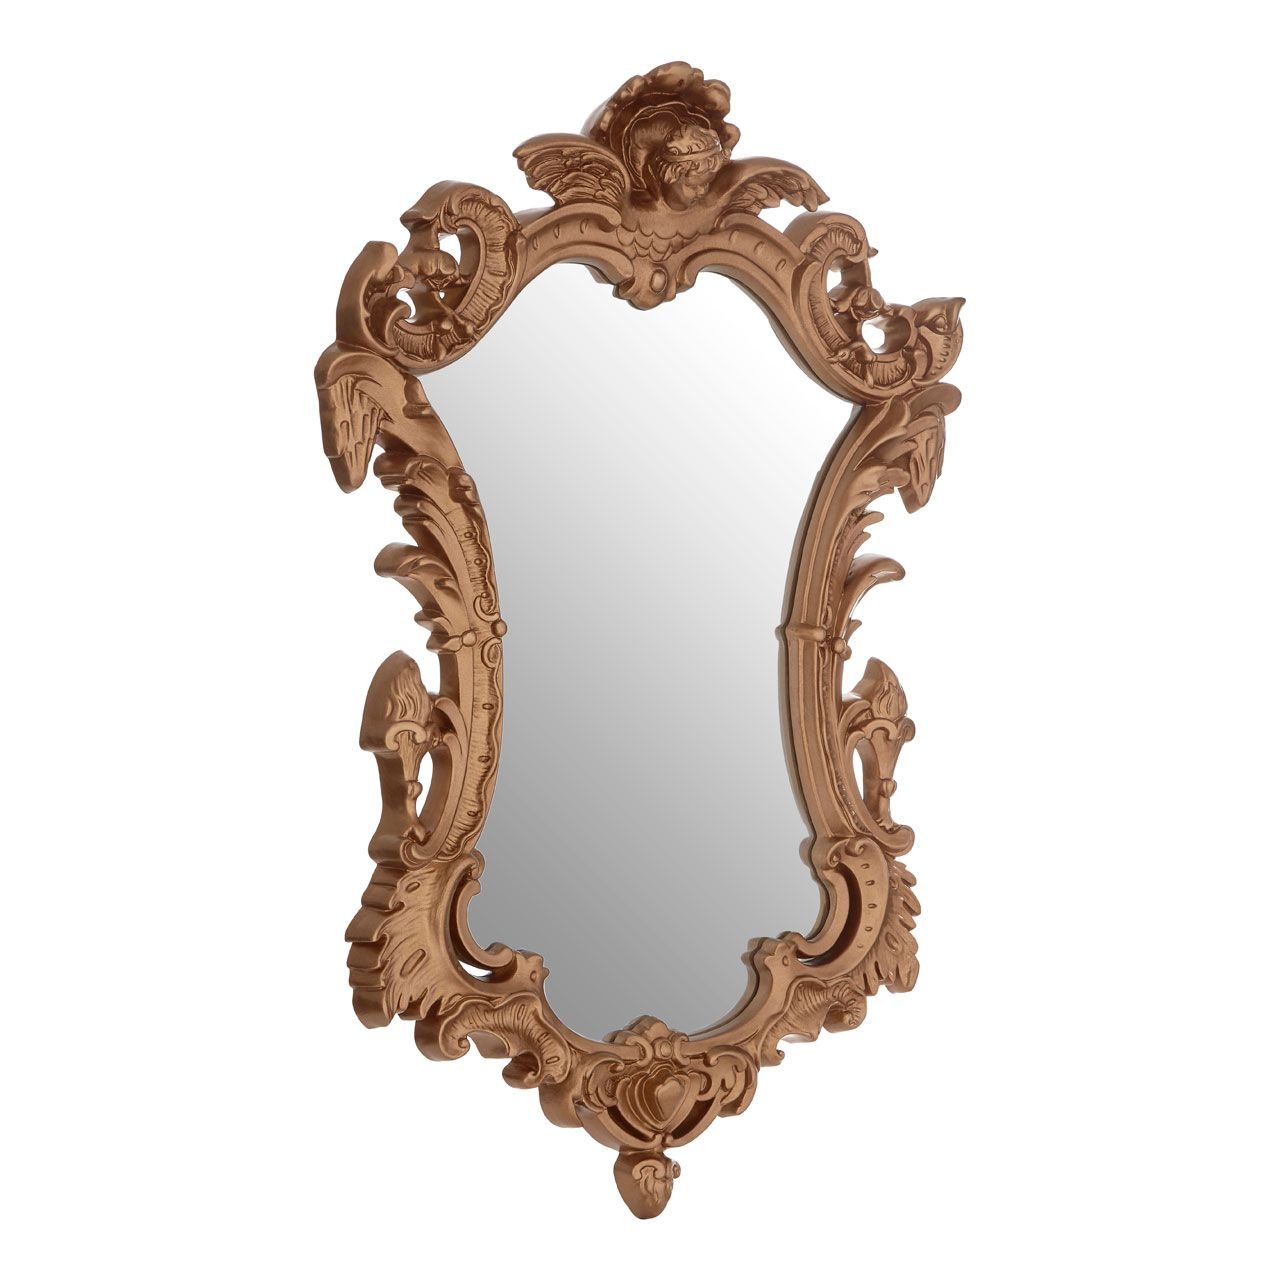 Neo-Classical Gold Finish Wall Mirror - MIRRORS, Mirrors | Eclectic Niche